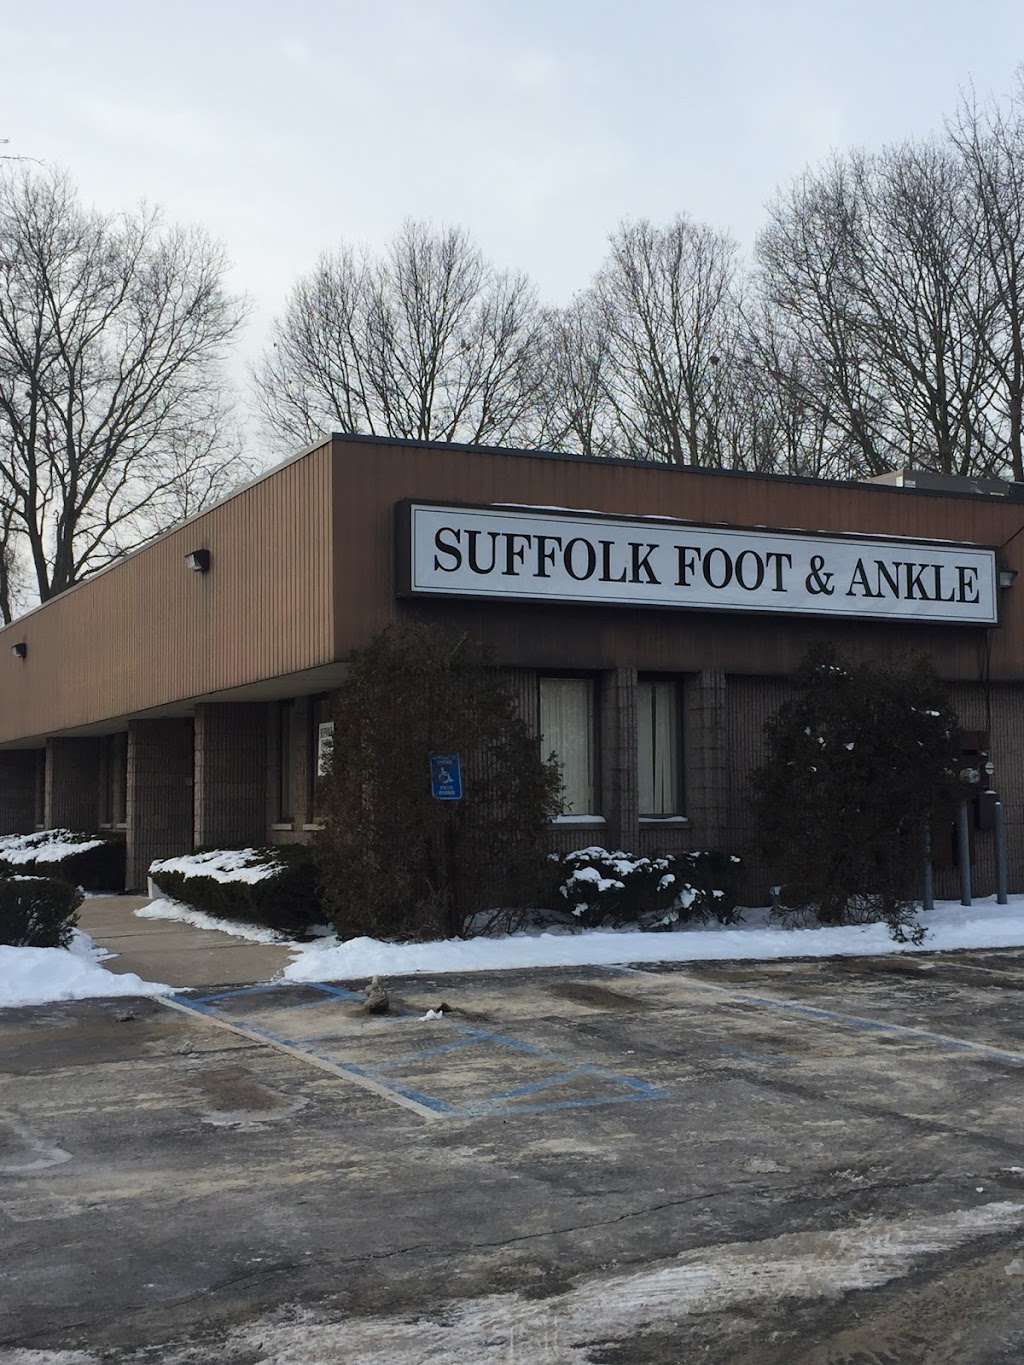 Suffolk Foot and Ankle | 1641 NY-112 suite a, Medford, NY 11763 | Phone: (631) 447-0800